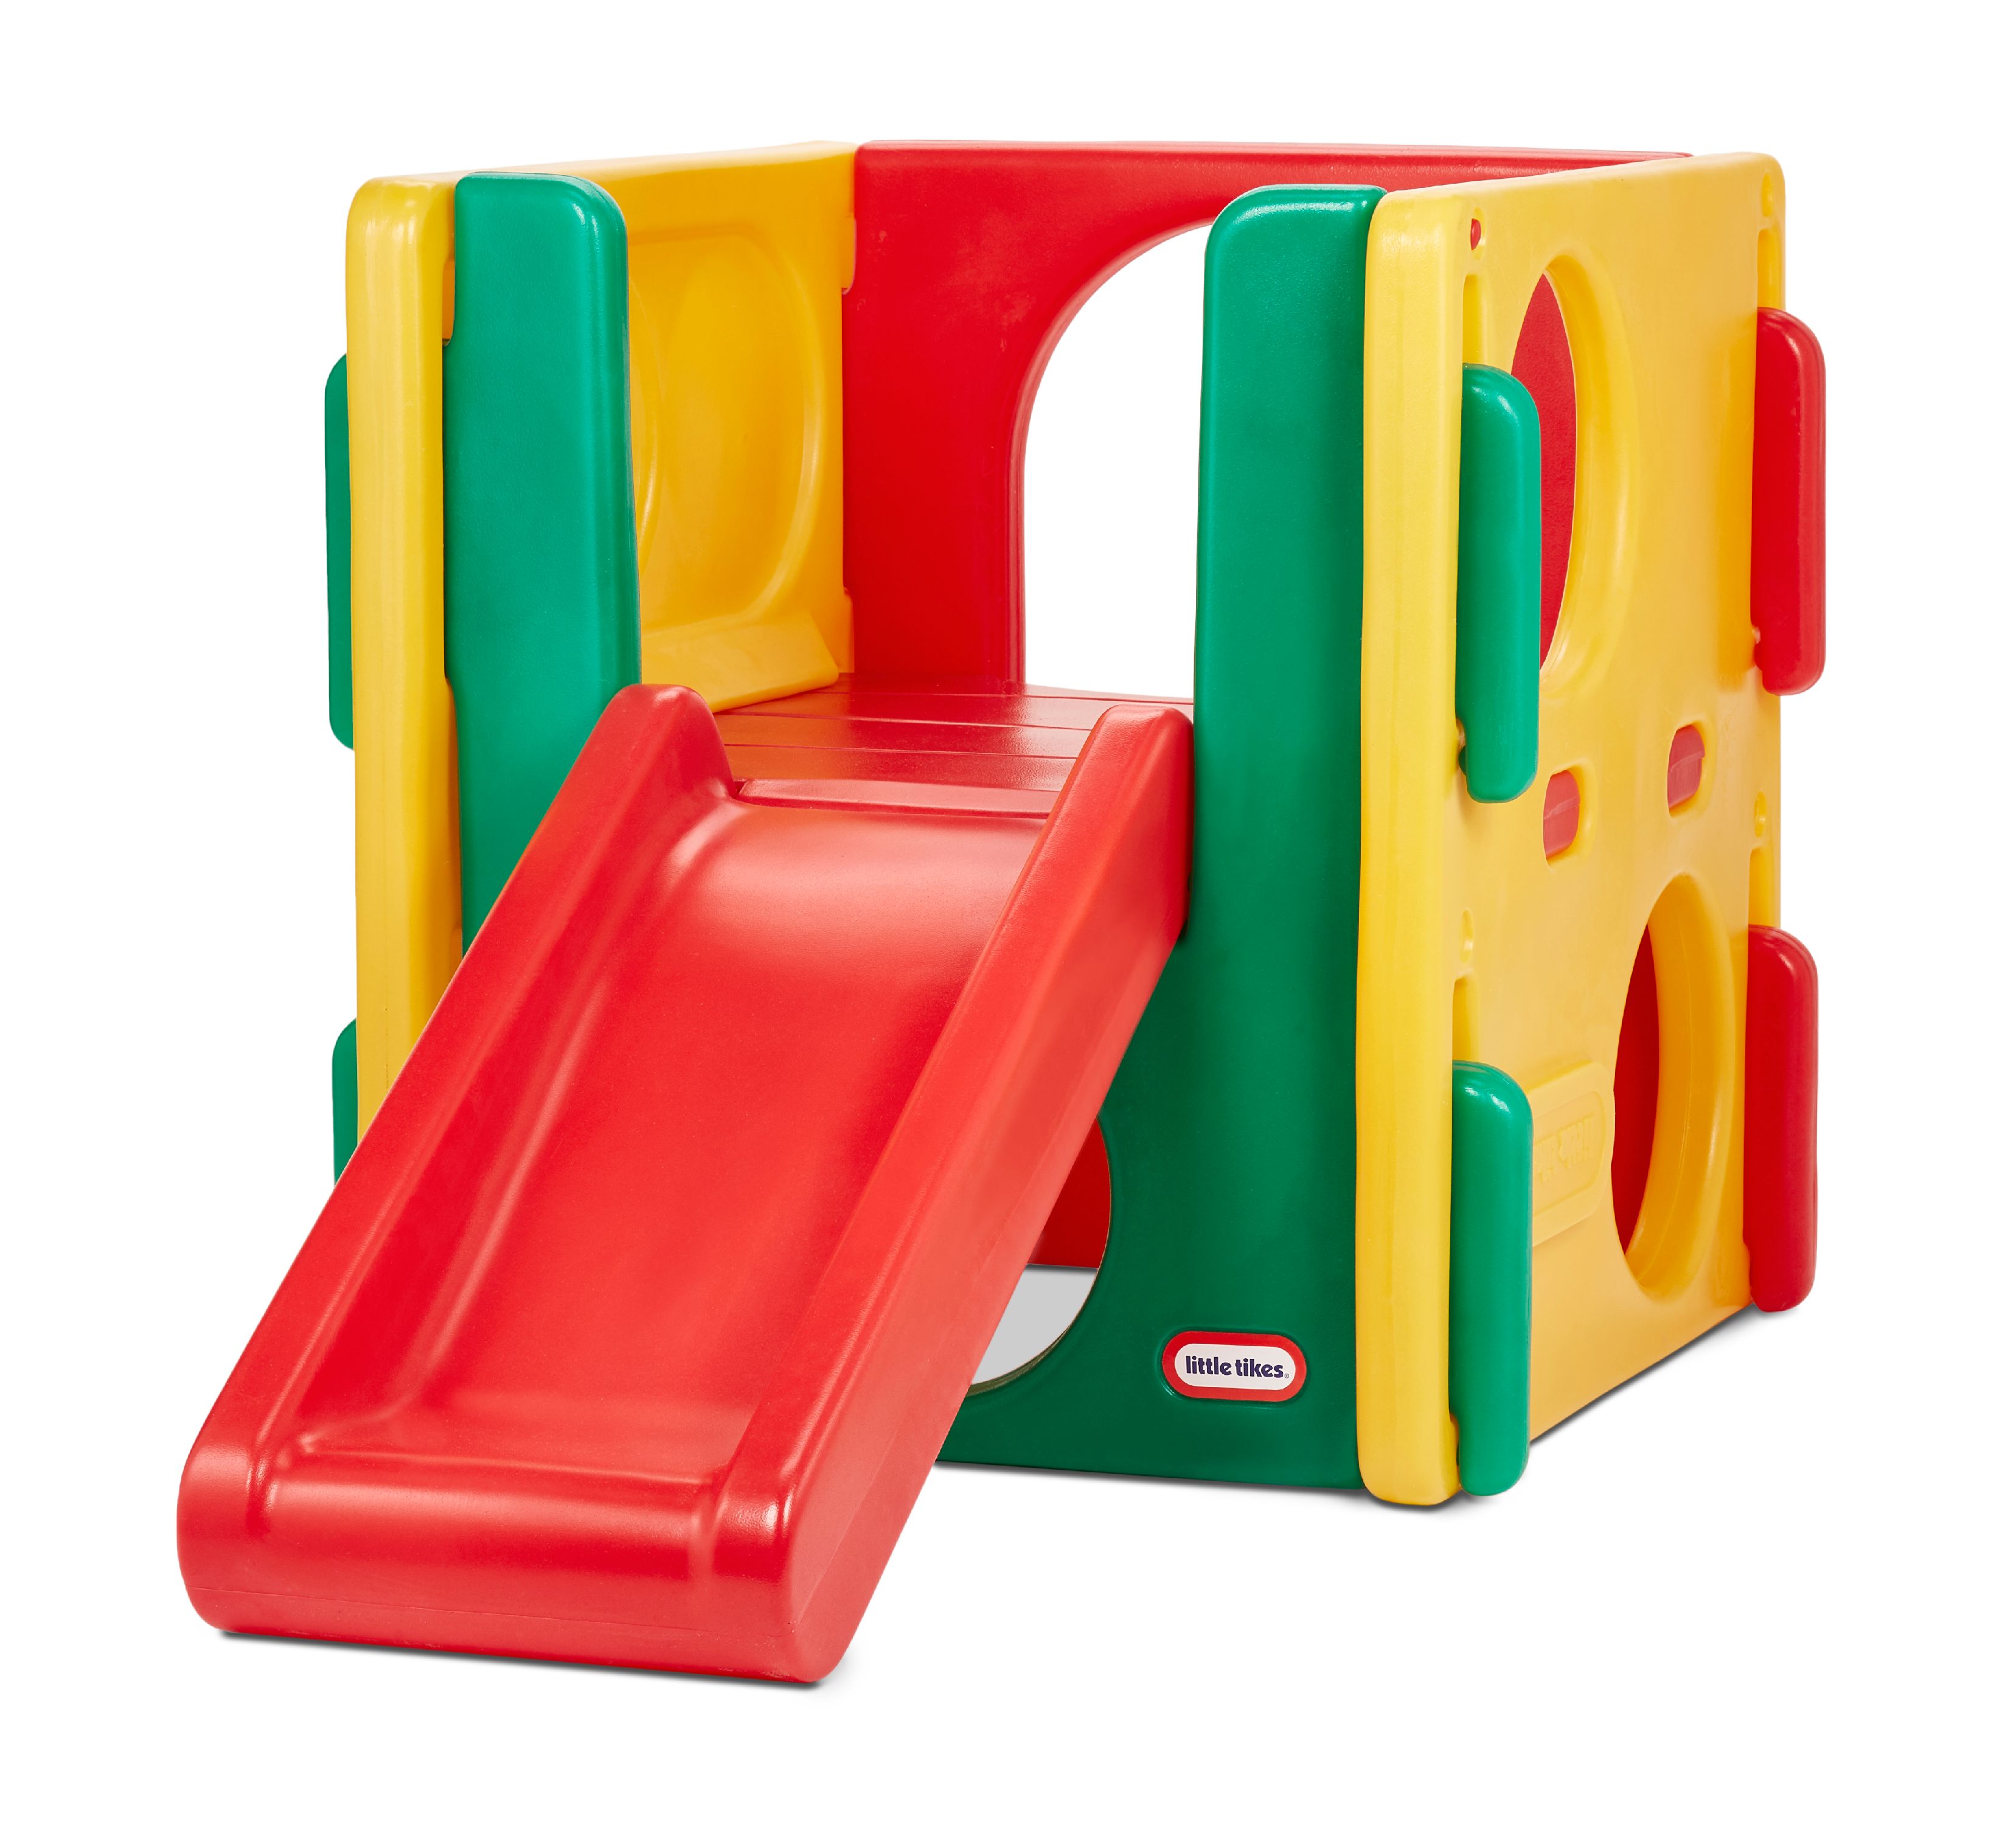 Little Tikes Jr. Activity Gym for Toddlers - image 1 of 6